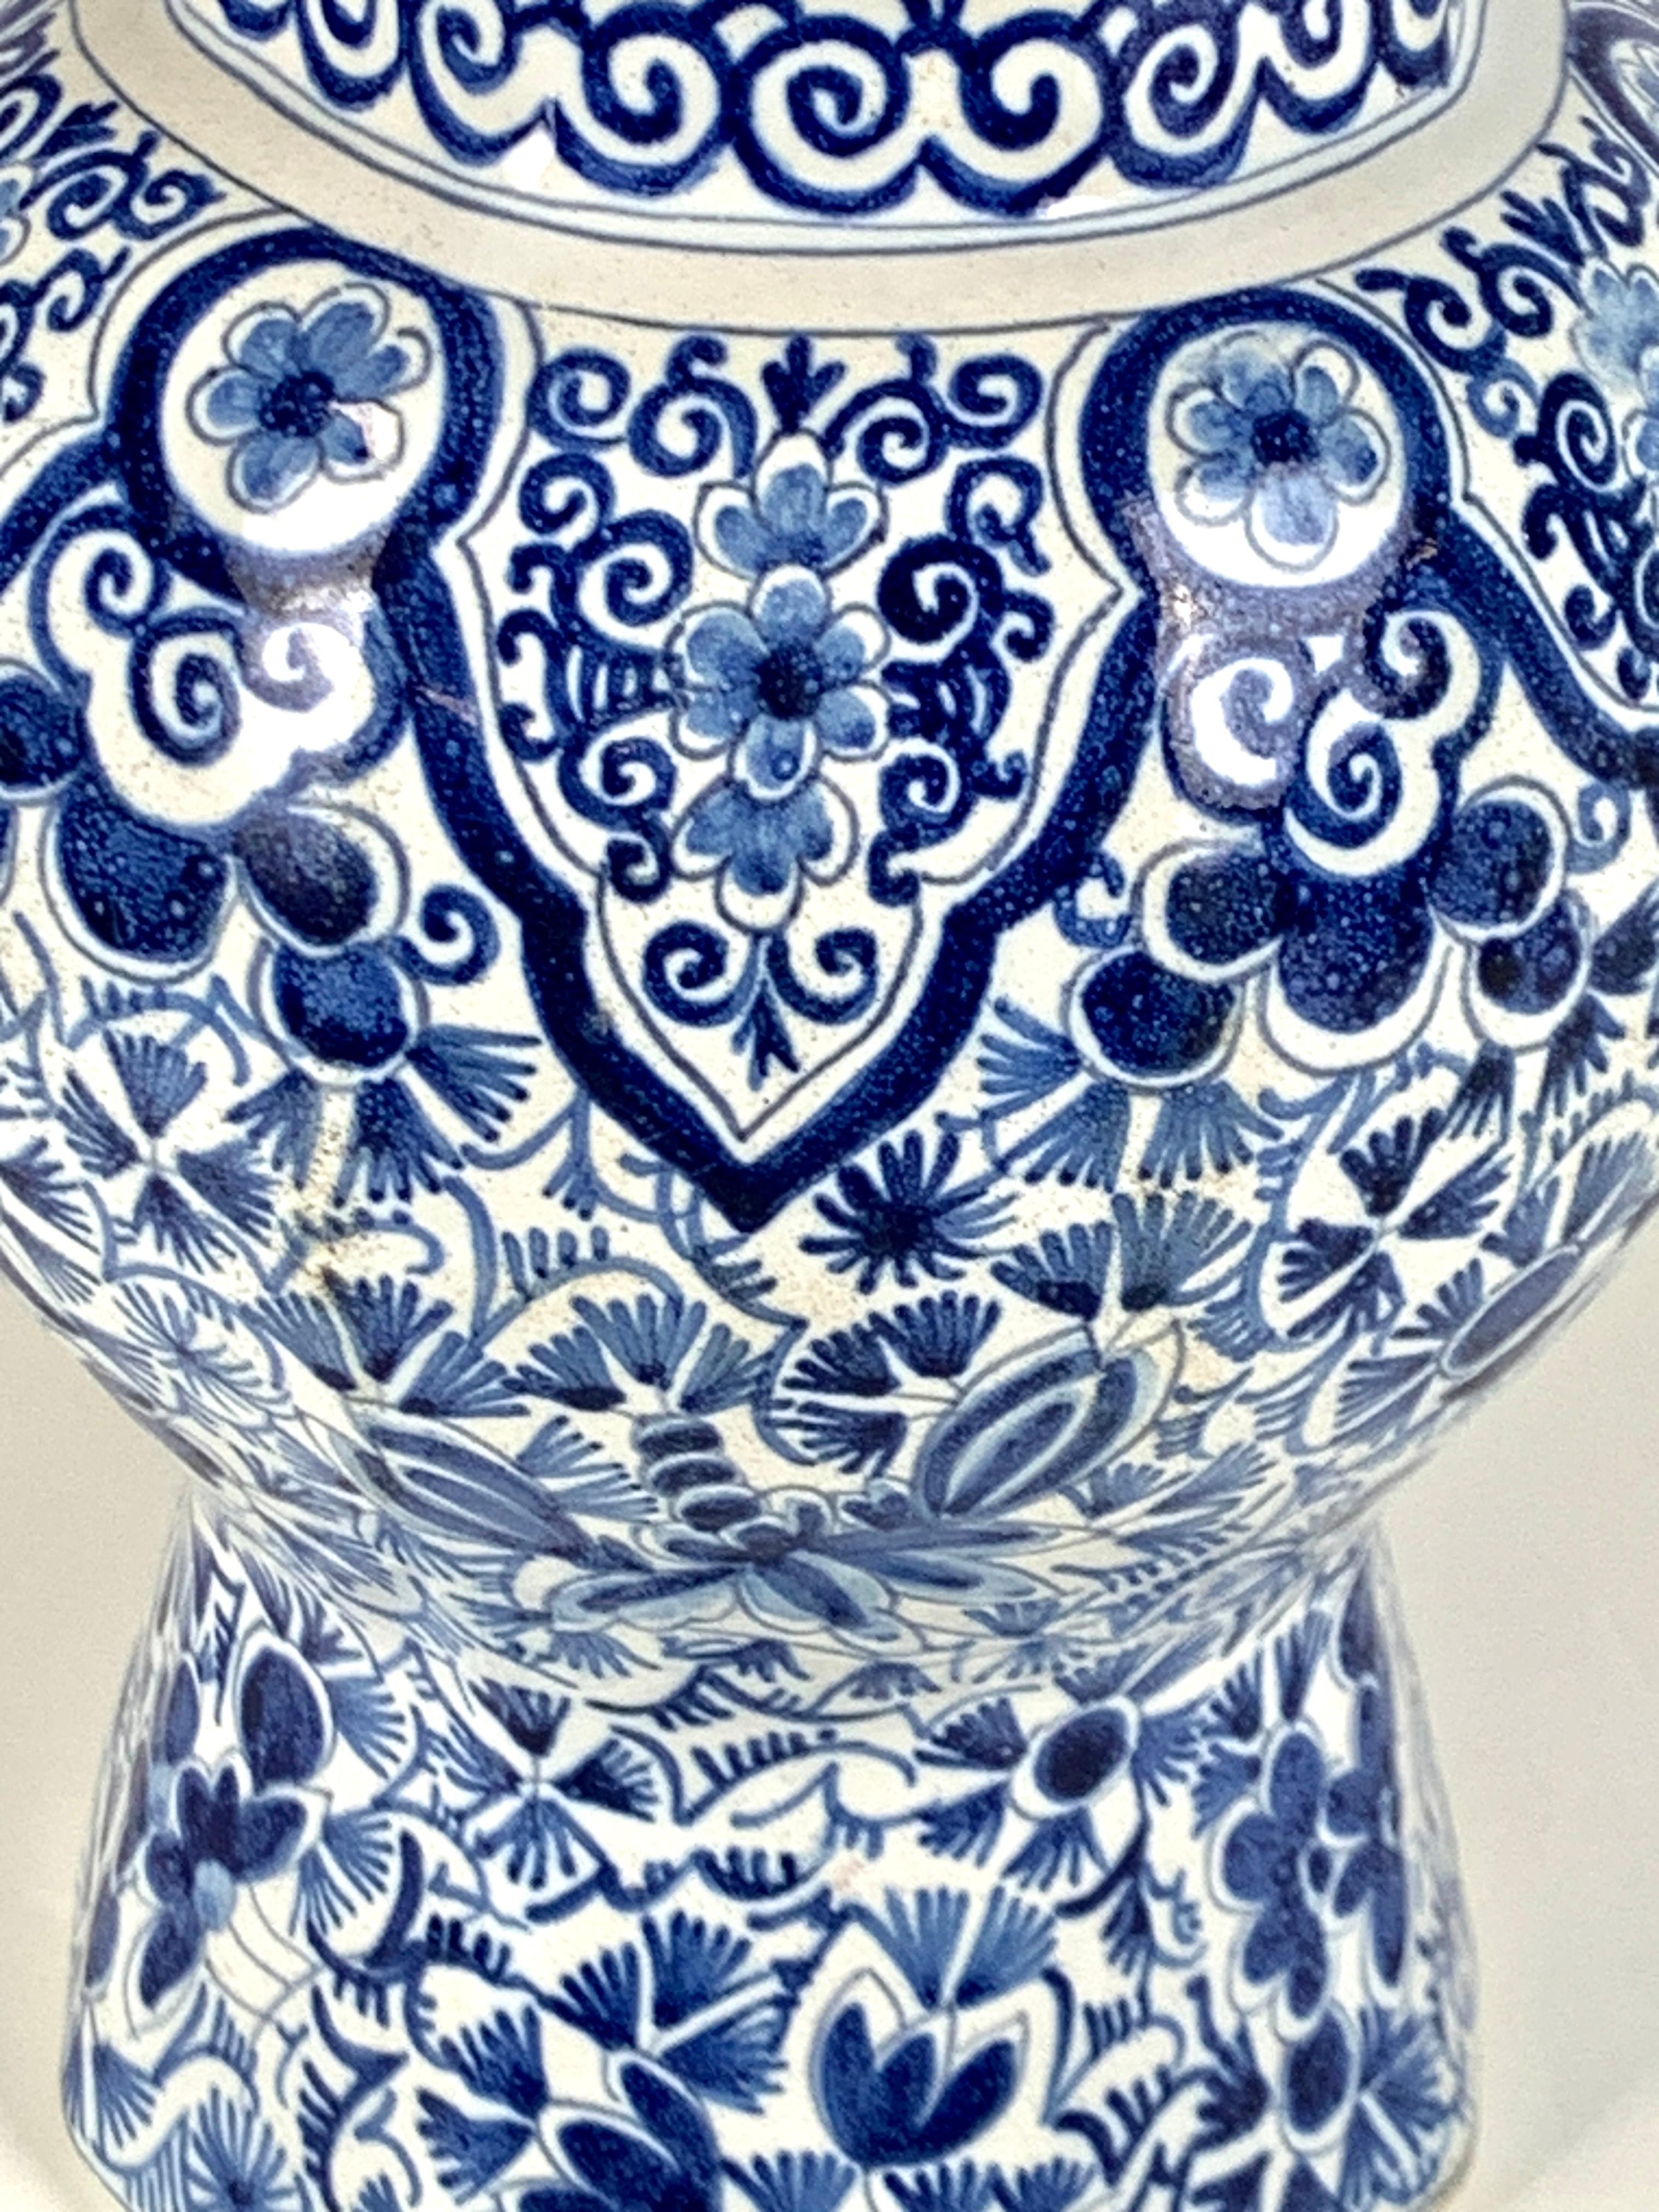 Dutch Antique Delft Blue and White Jar Made by The Claw Netherlands Circa 1790 For Sale